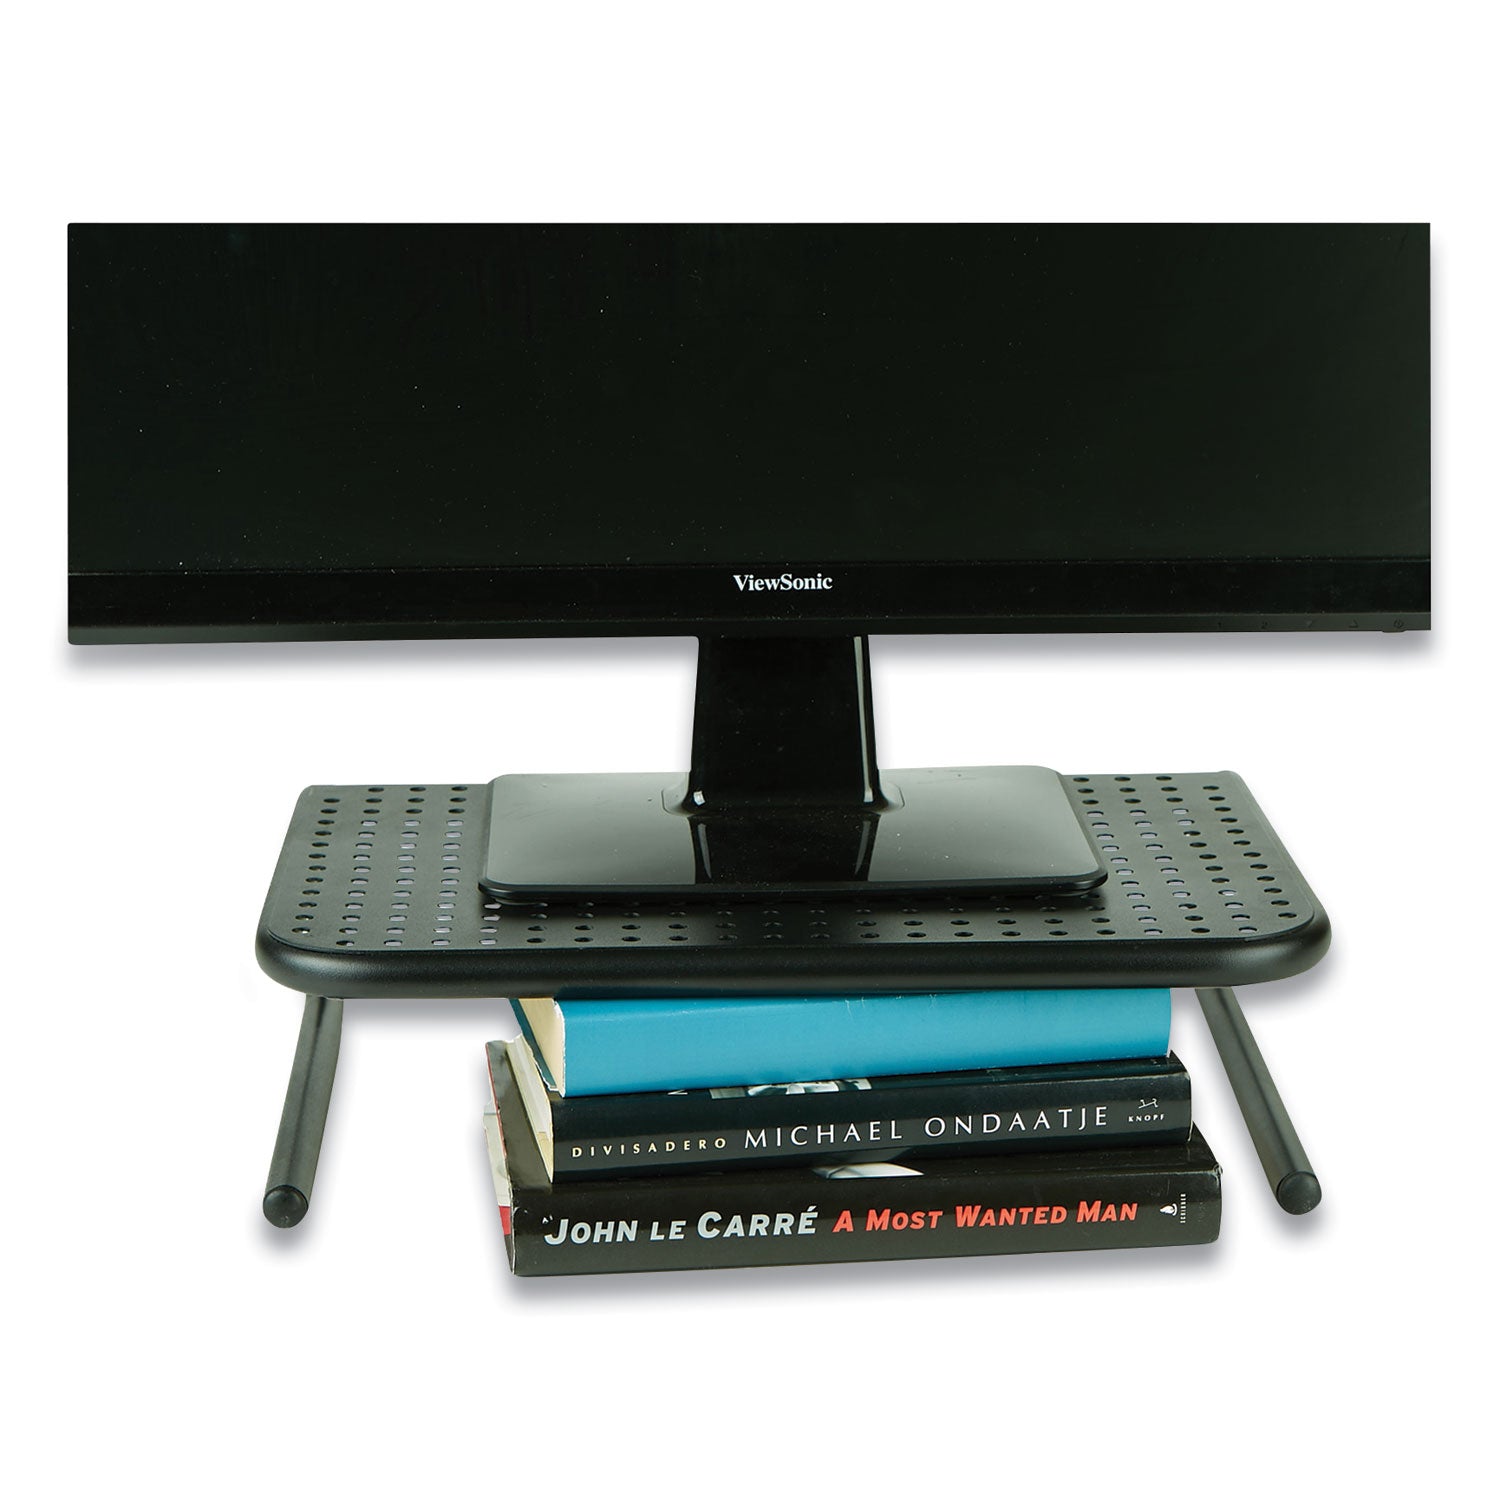 metal-monitor-stand-riser-for-computer-1488-x-1133-x-421-black-supports-44-lbs_ems2metmonstblk - 5